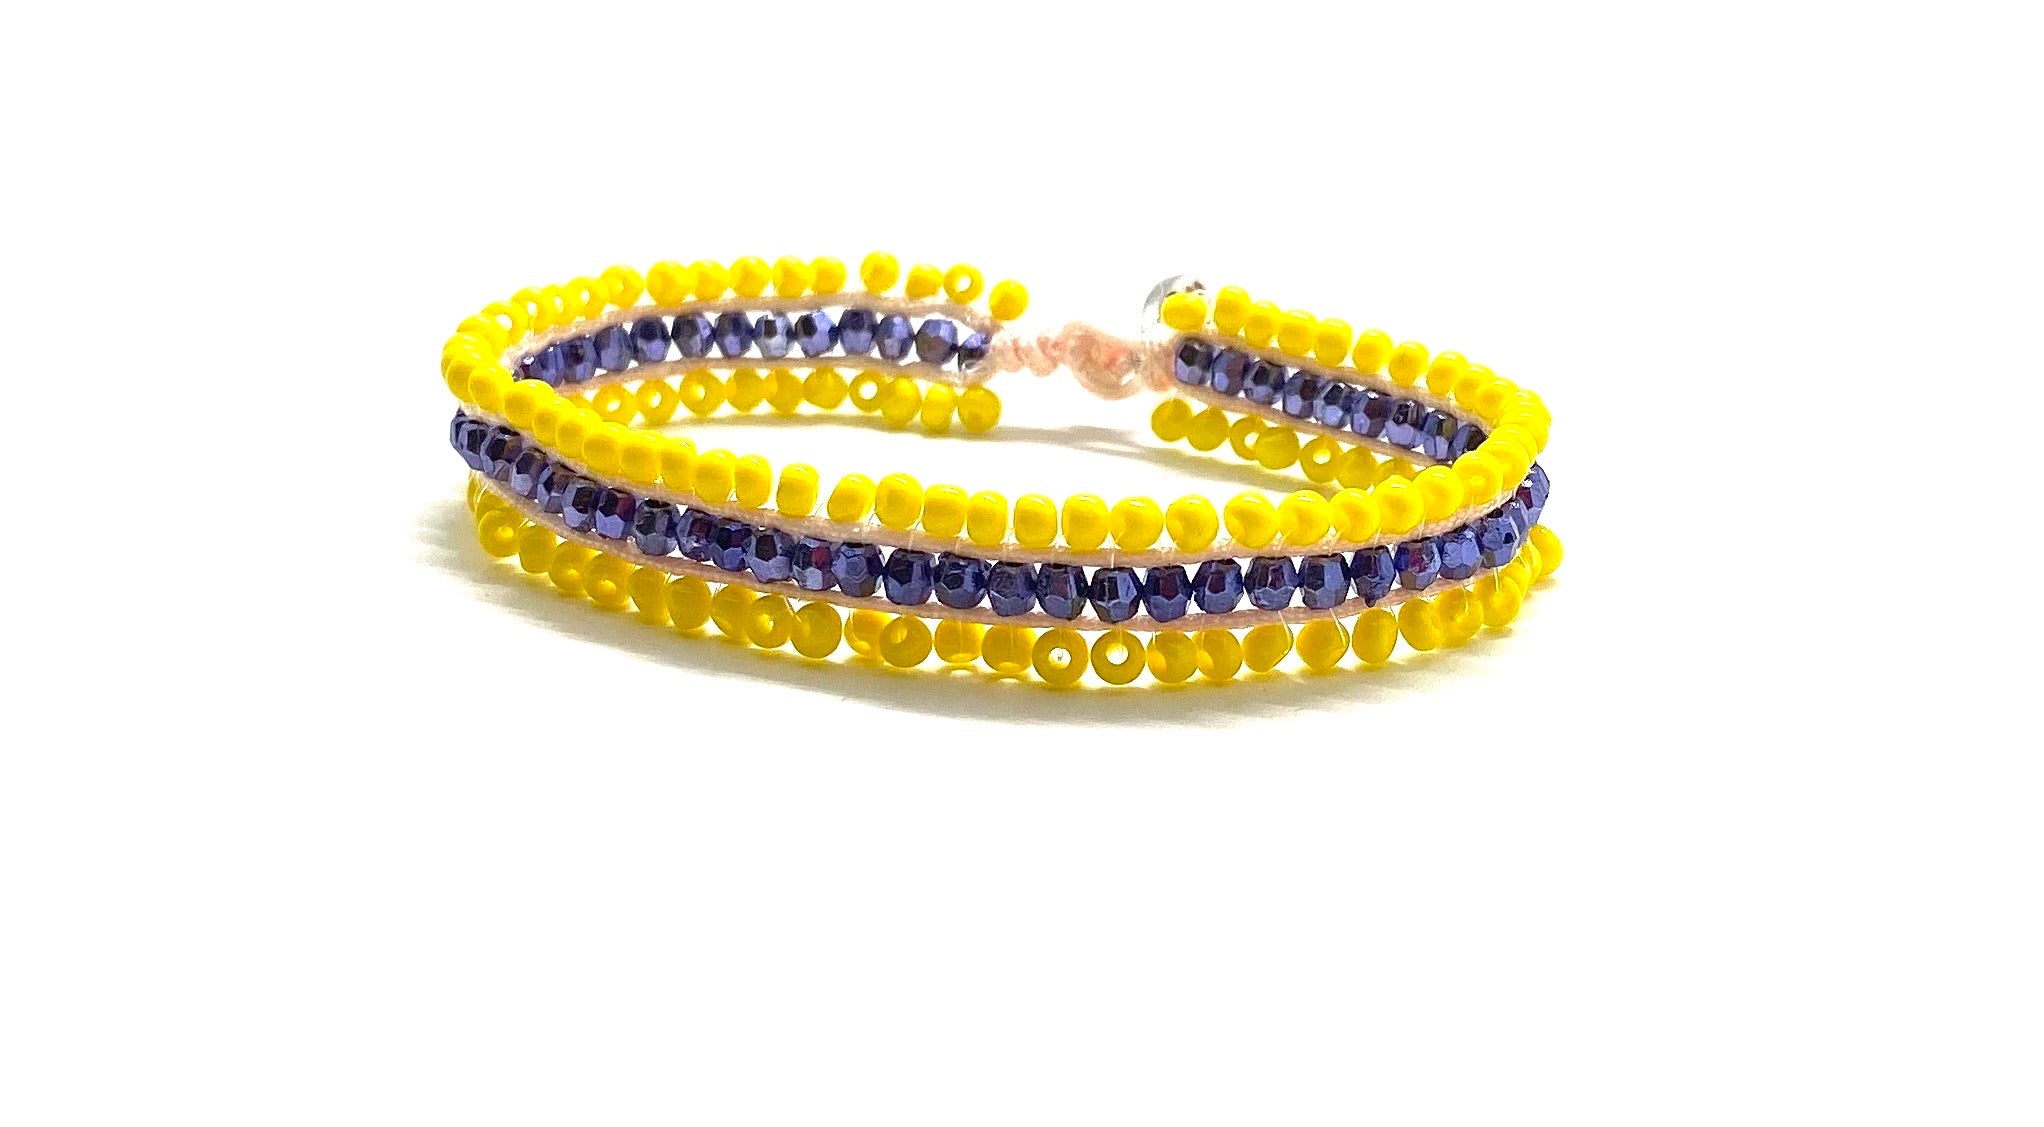 Beaded bracelet, yellow and purple seed beads and yellow cord.